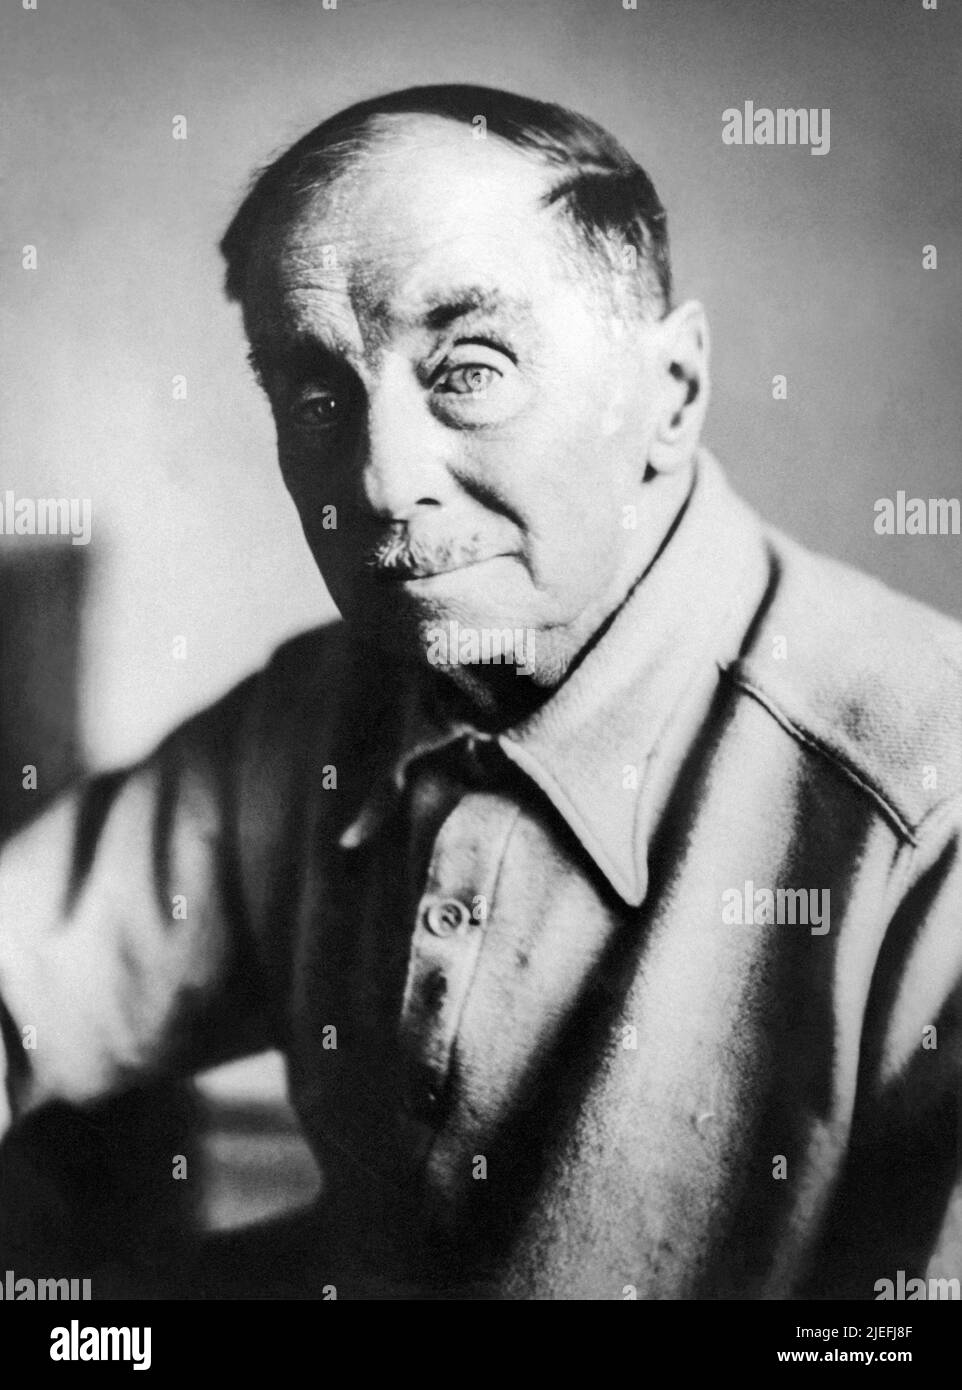 H. G. Wells (1866-1946), britischer Autor der Science-Fiction-Klassiker The war of the Worlds, The Invisible man, The Time Machine und The Island of Dr. Moreau. (Foto: 1944) Stockfoto